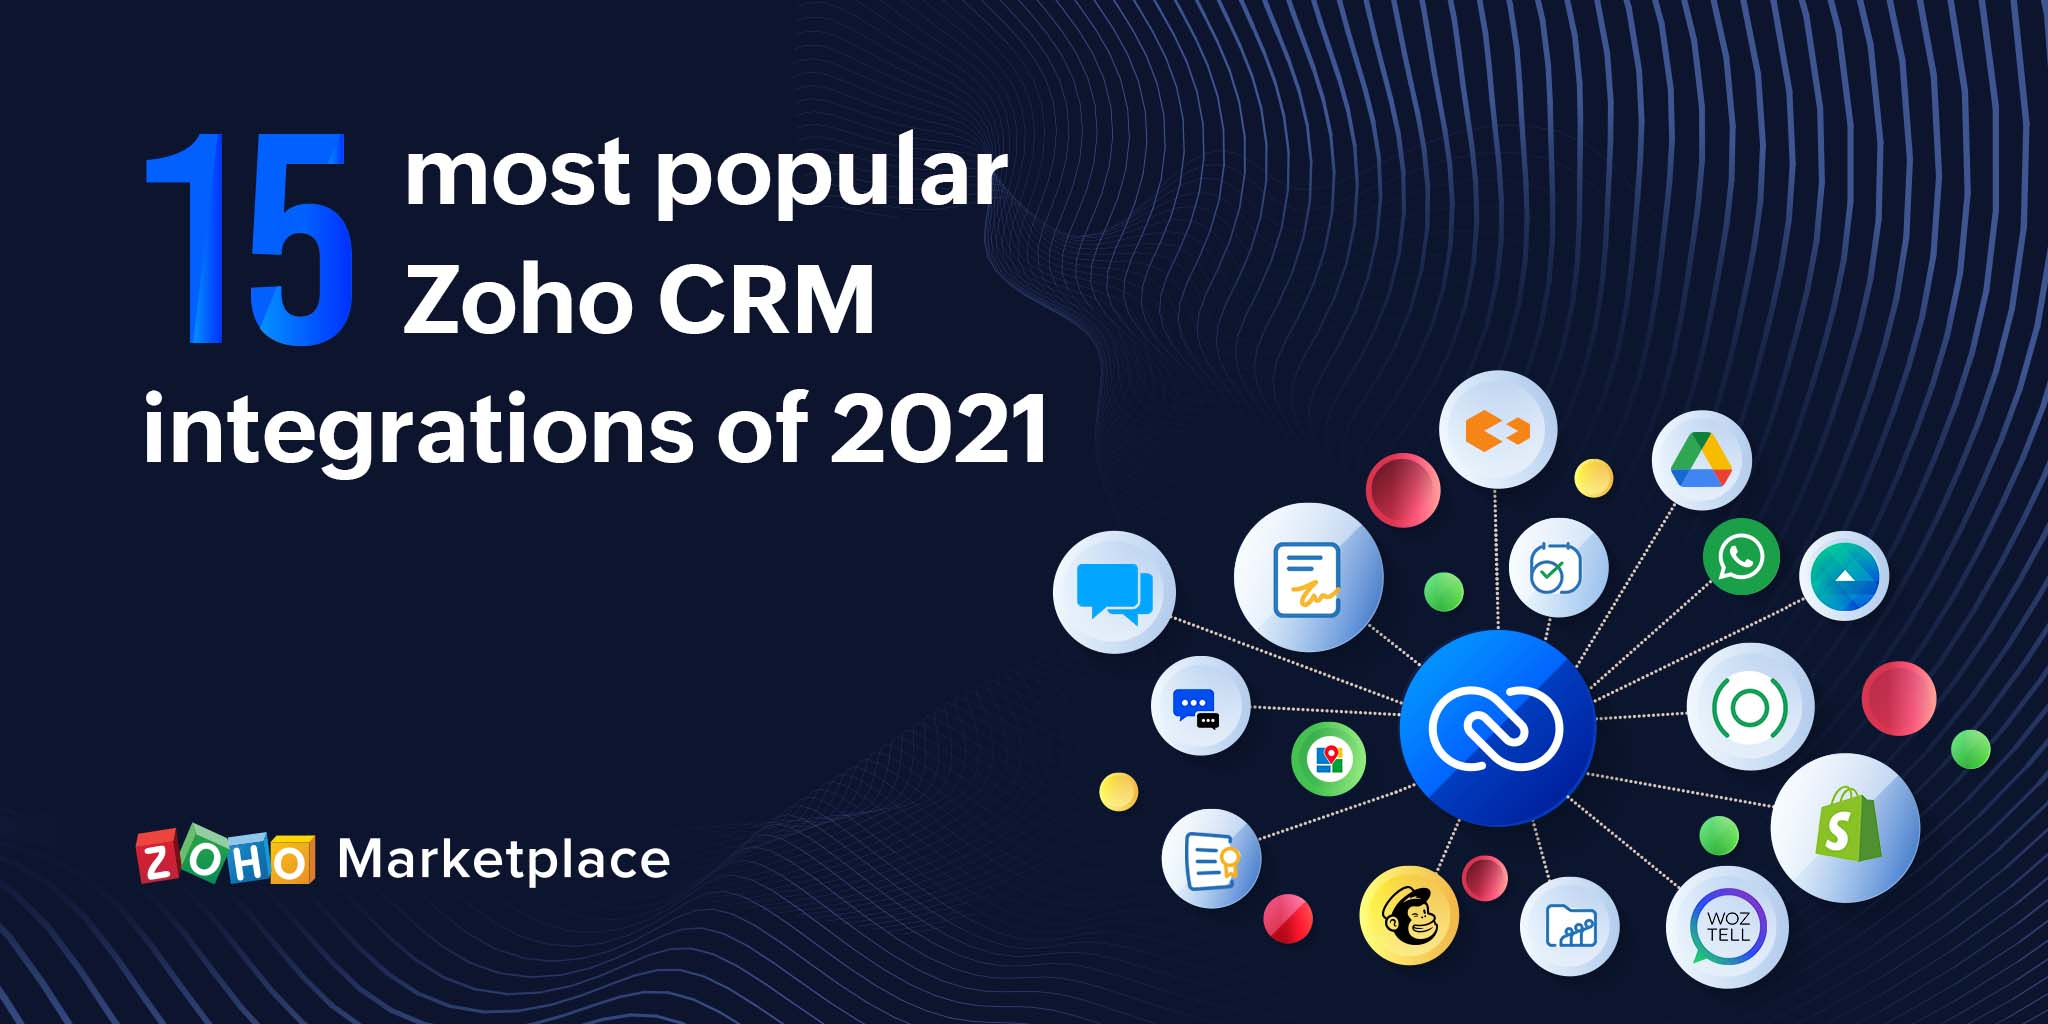 15 most popular Zoho CRM integrations of 2021